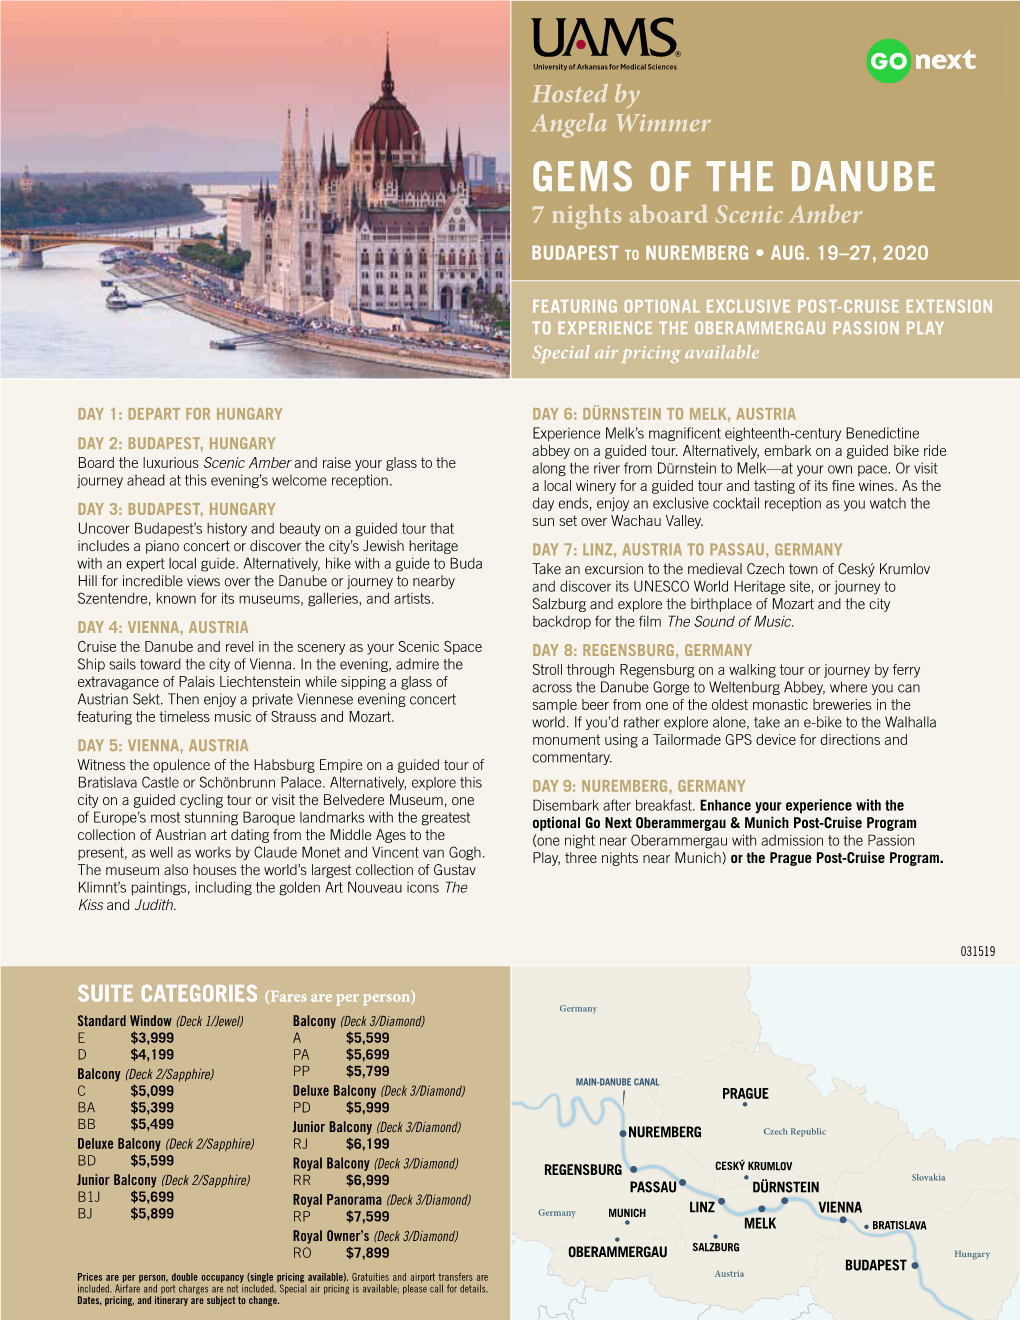 GEMS of the DANUBE 7 Nights Aboard Scenic Amber